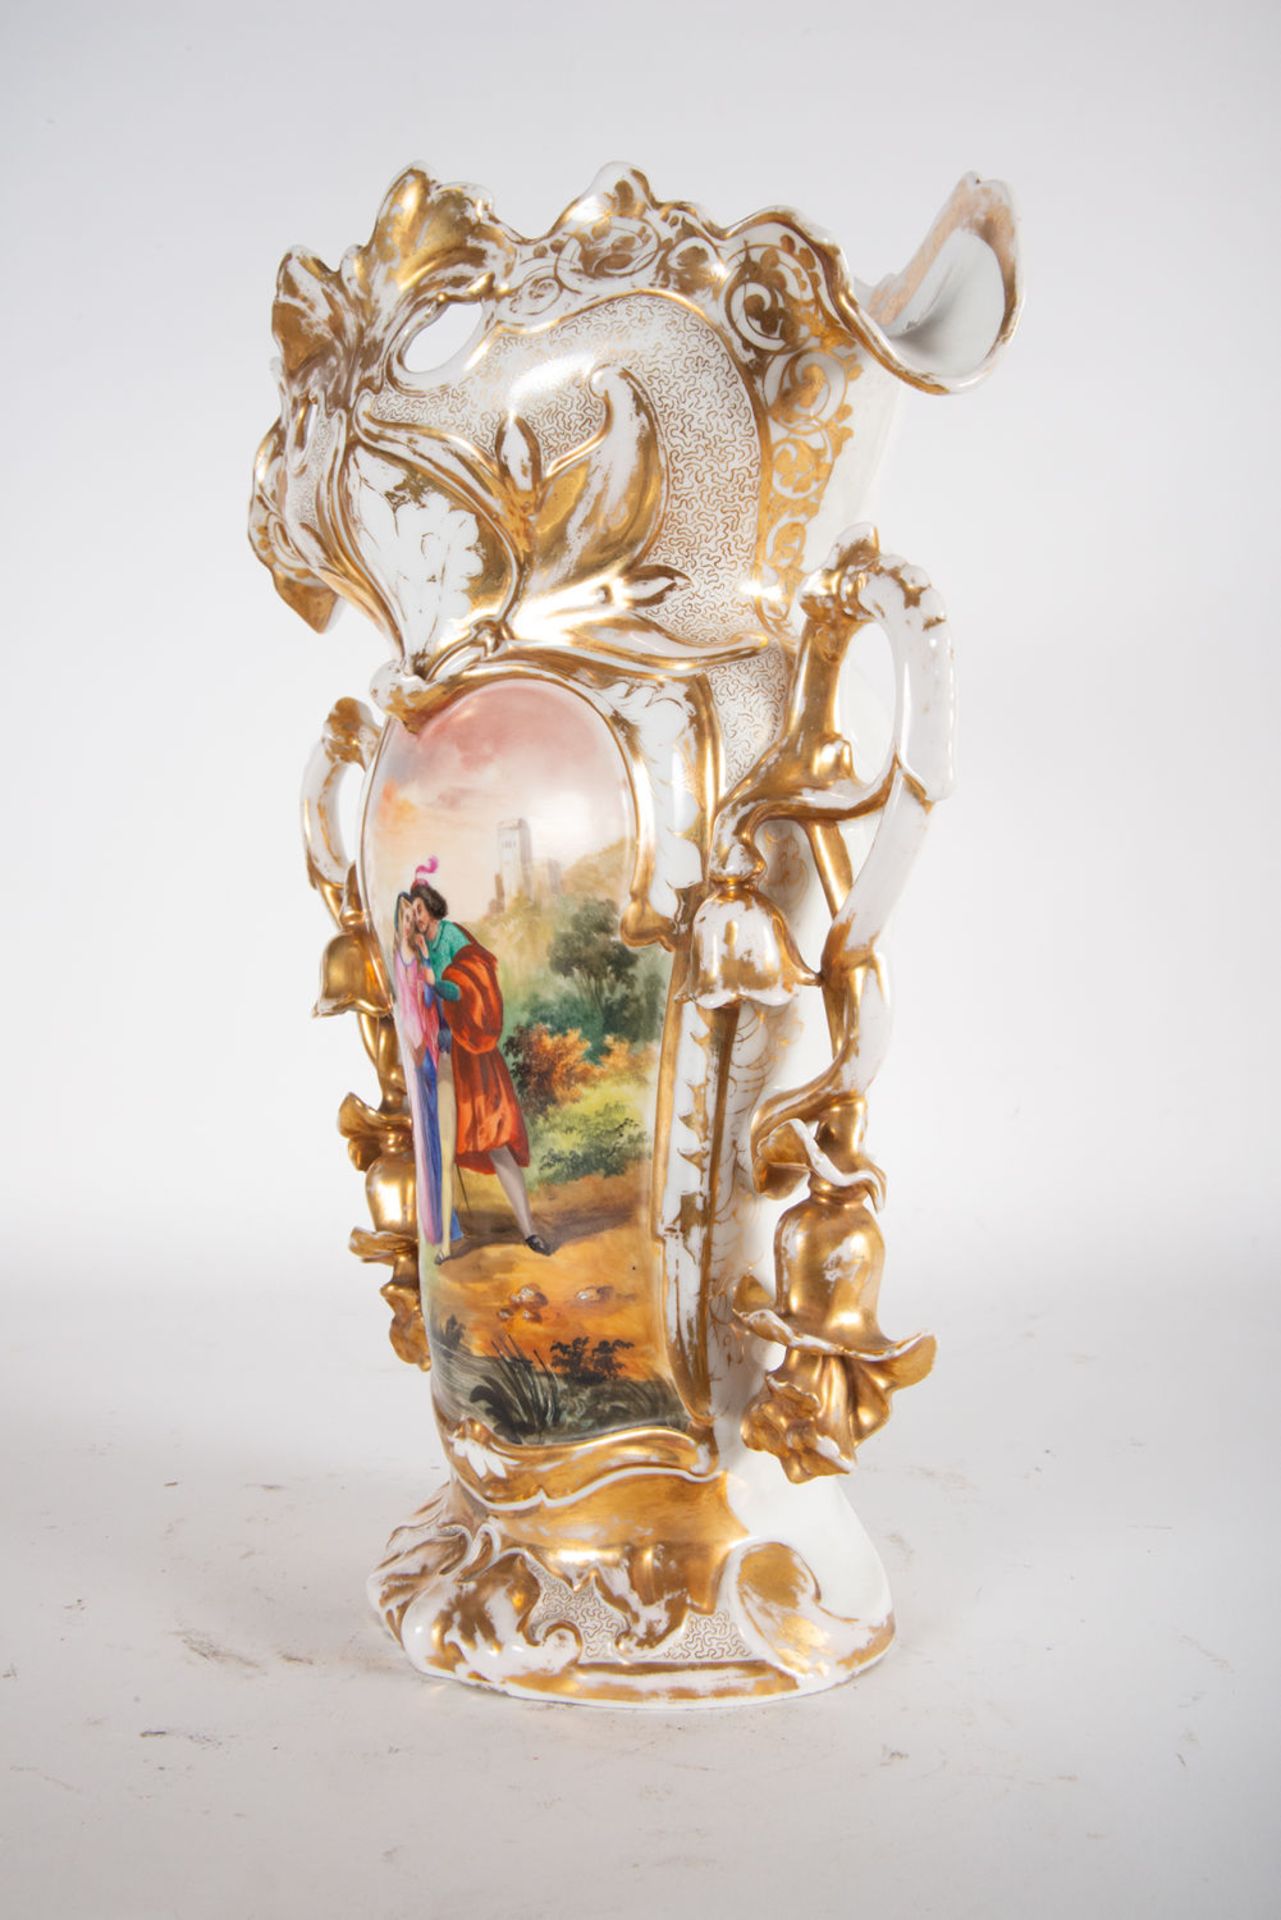 Pair of Elizabethan Vases in enameled and polychrome porcelain, 19th century - Image 4 of 10